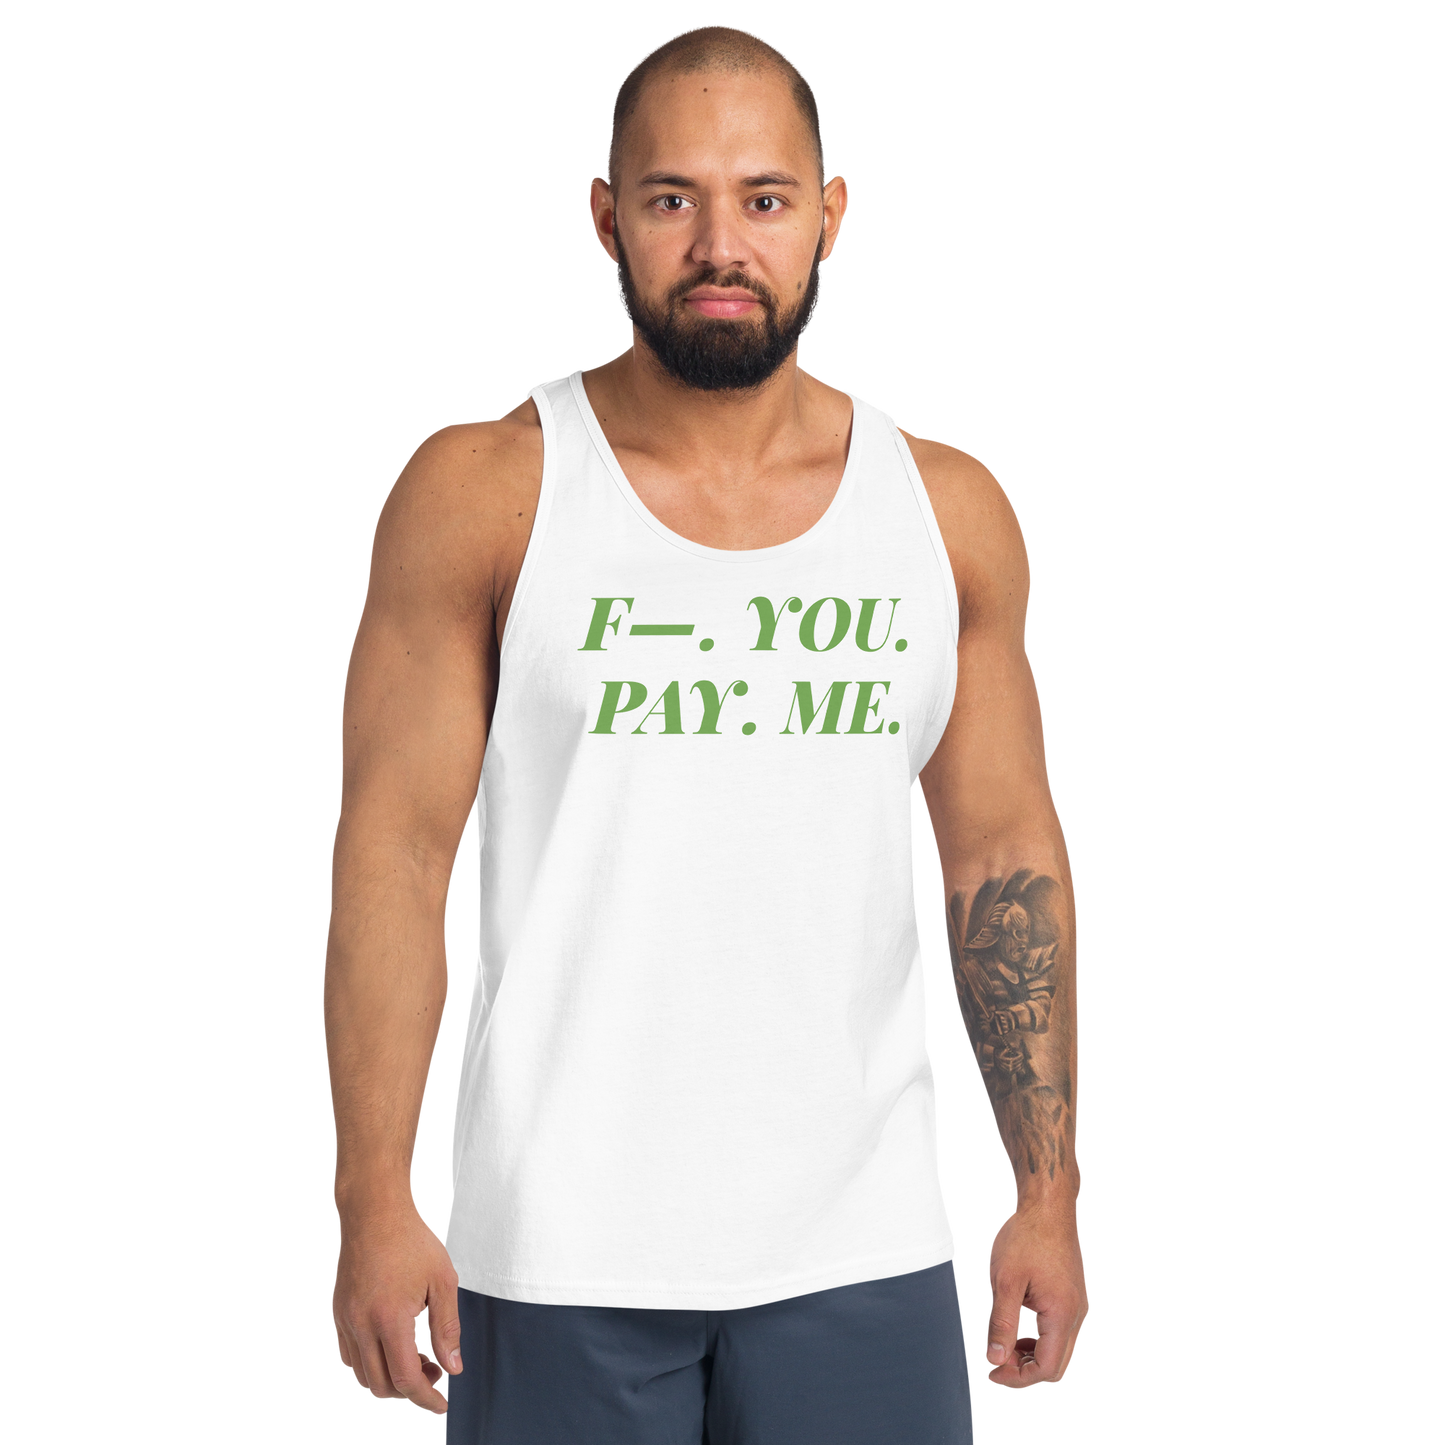 F—. You. Pay. Me. Tank Top